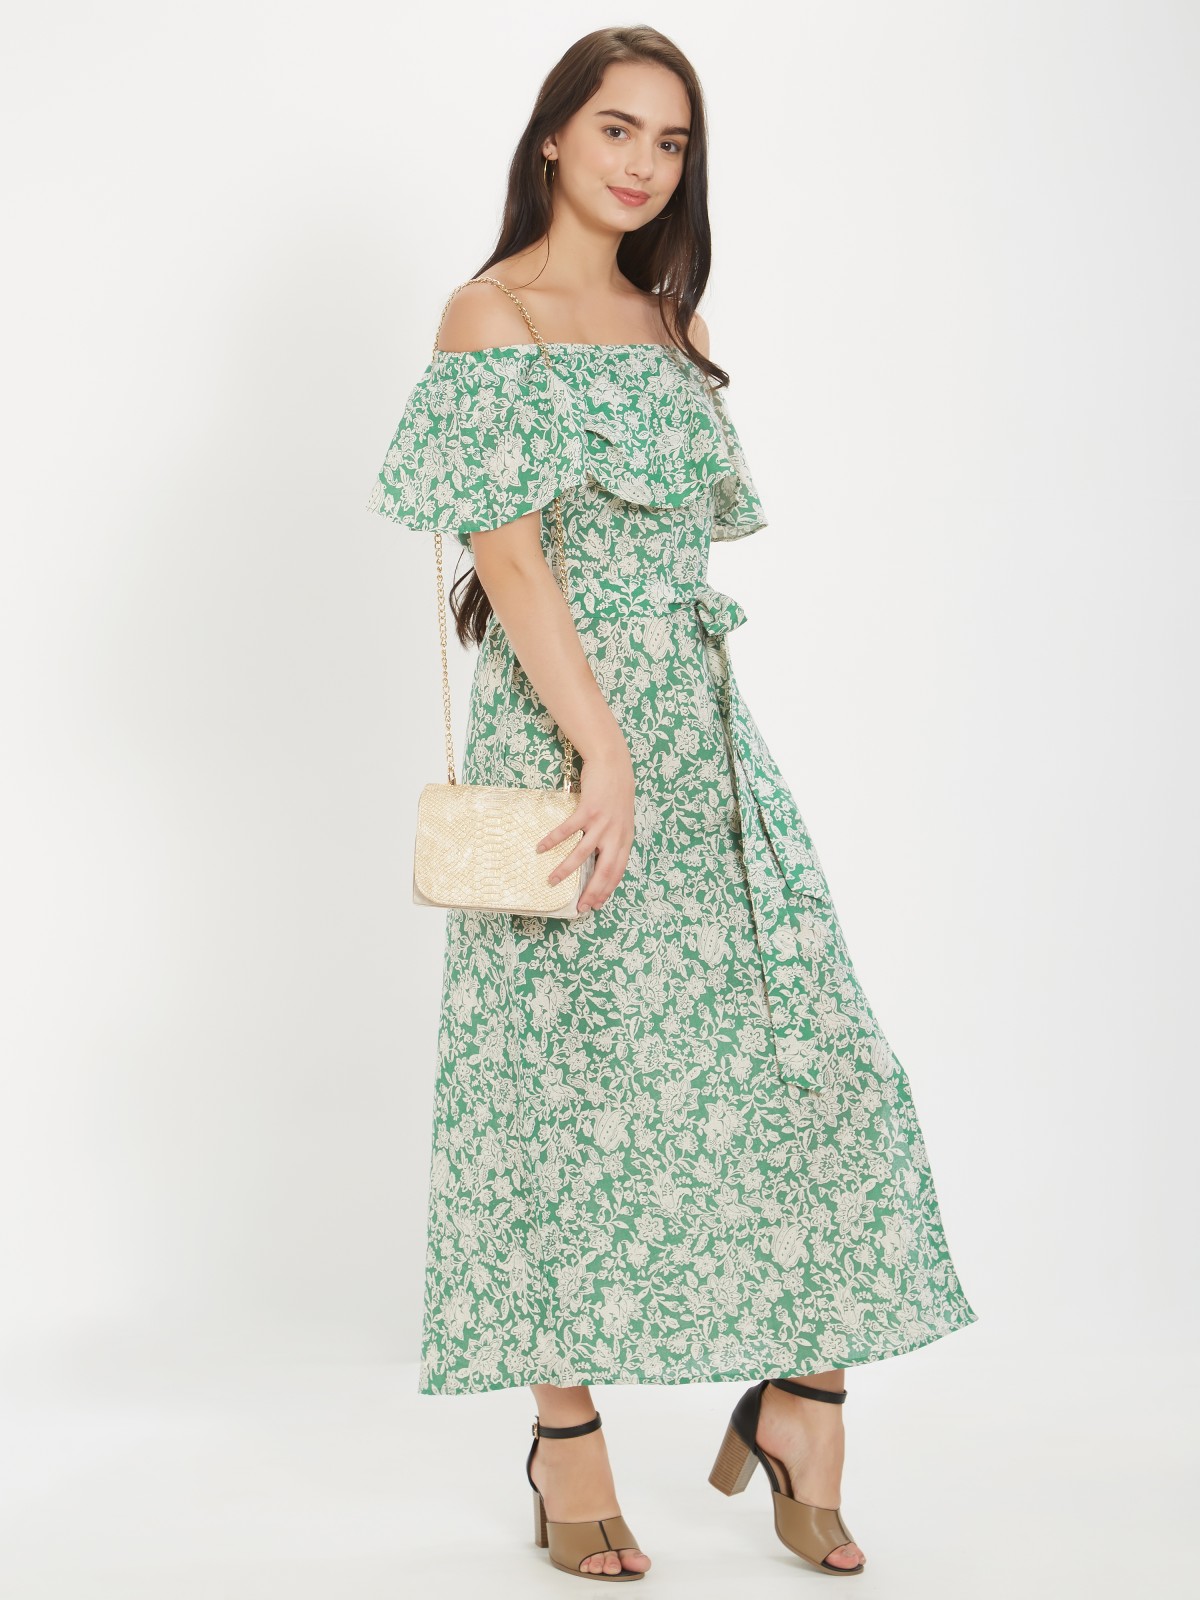 Light Green Floral Printed Off Shoulder Cotton Linen One Piece Dress Exclusive